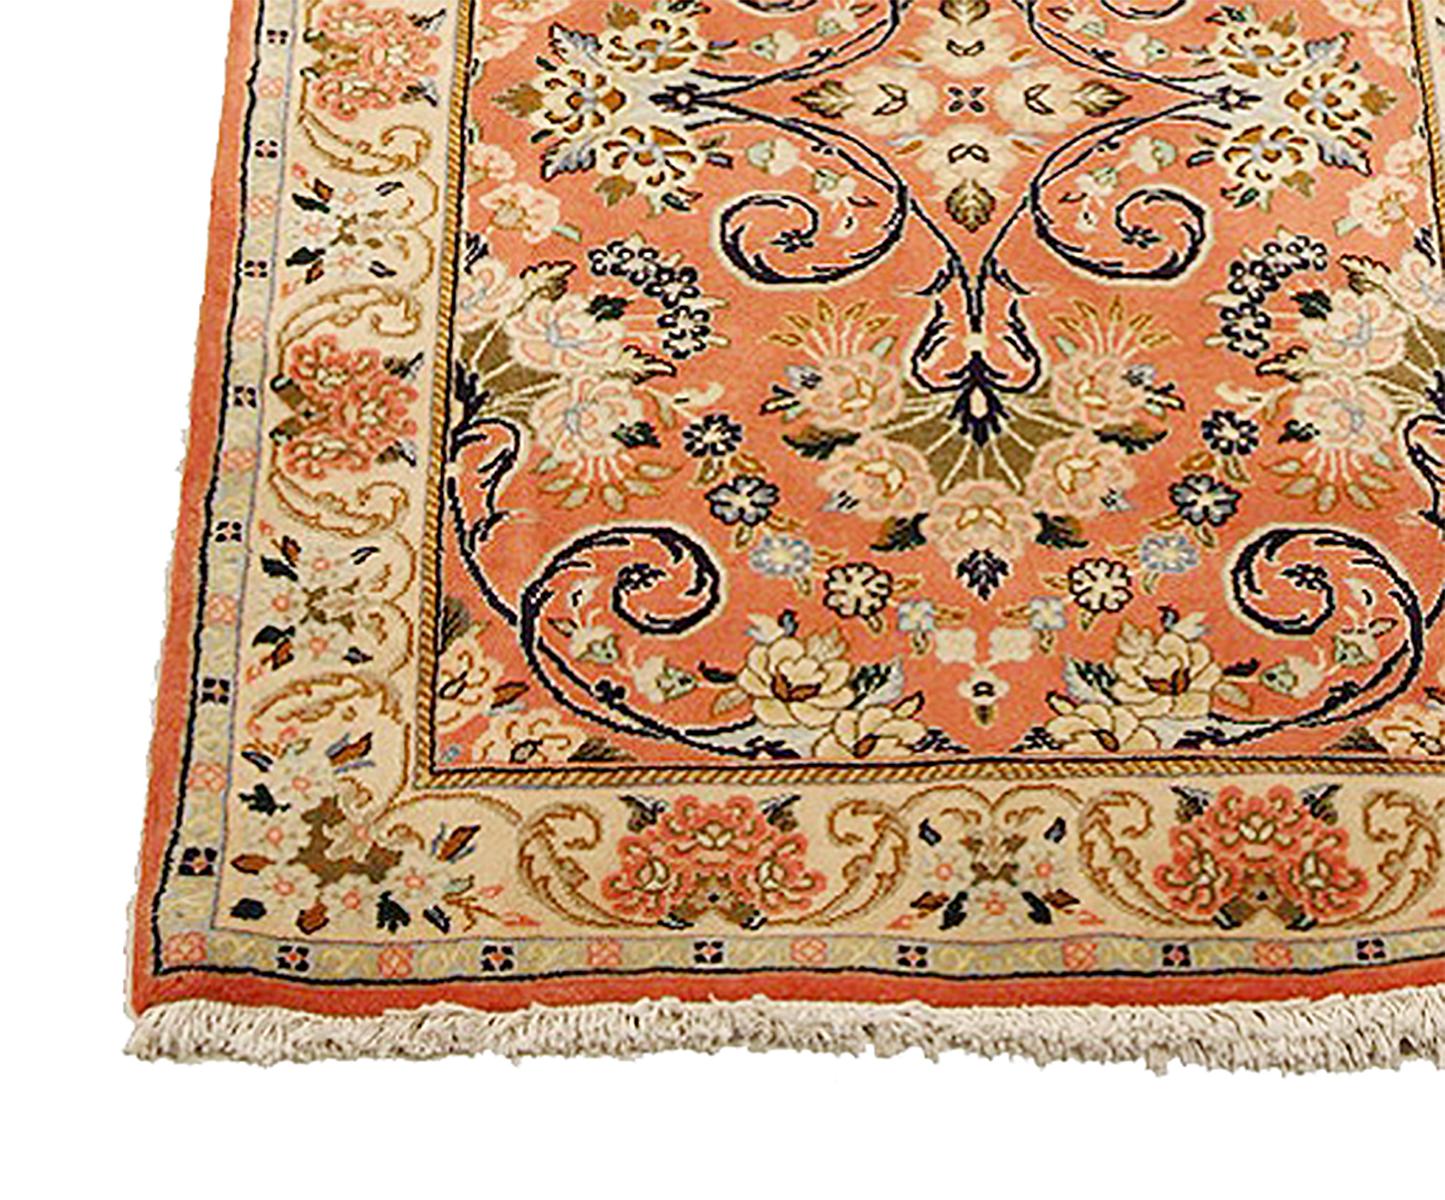 Hand-Woven Antique Persian Sarouk Runner Rug with Navy & Ivory Flower Details For Sale